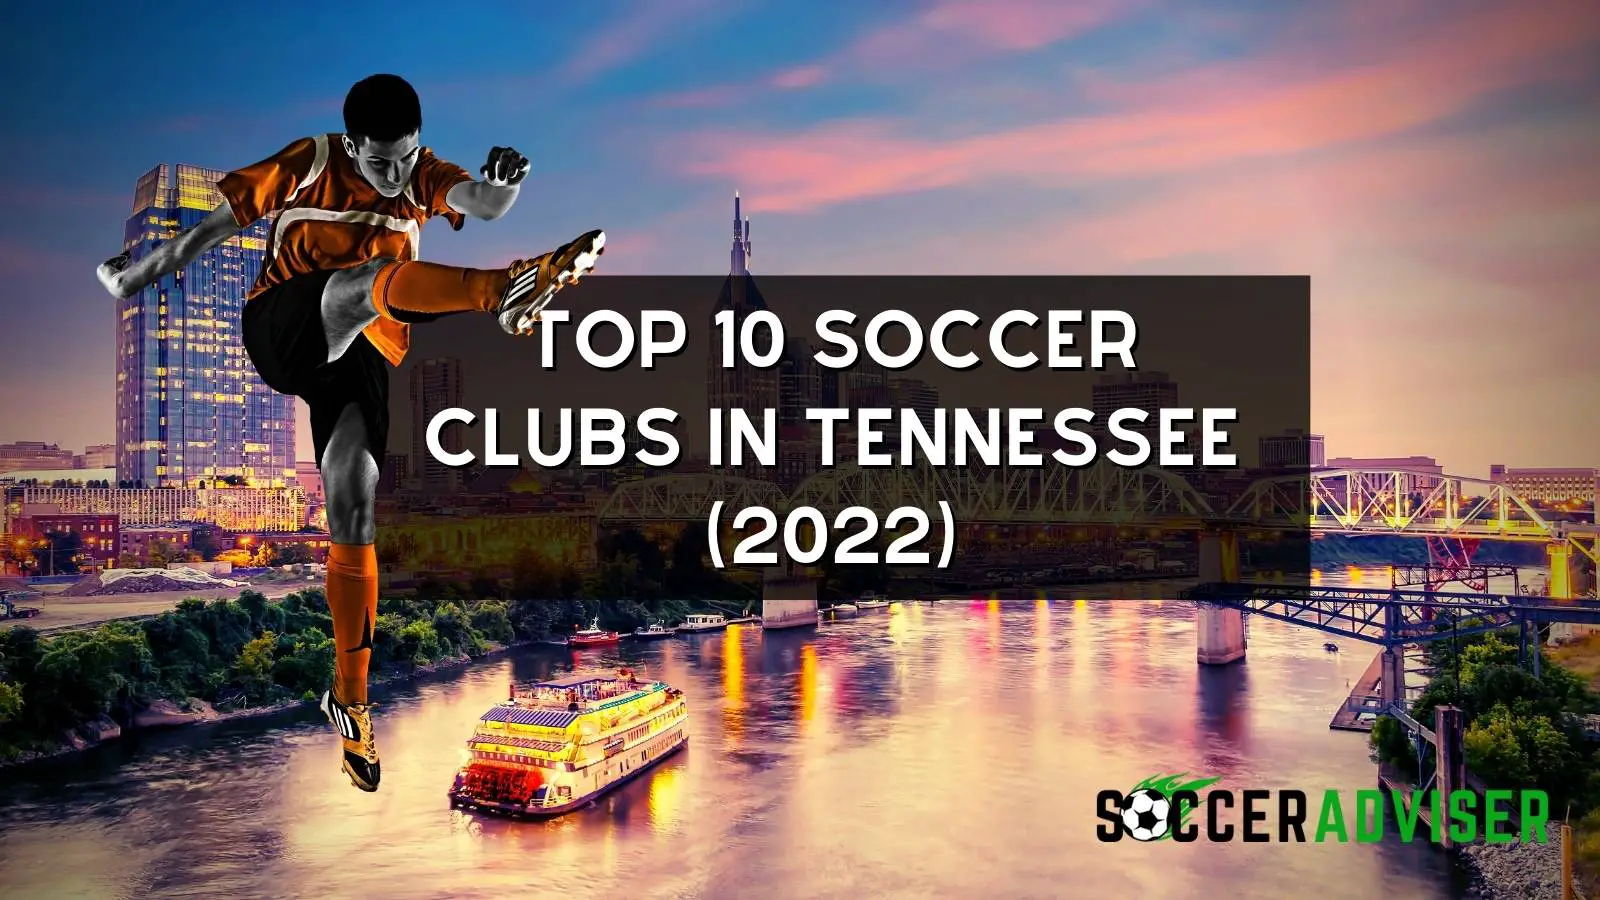 Top 10 Soccer Clubs In Tennessee (2022)